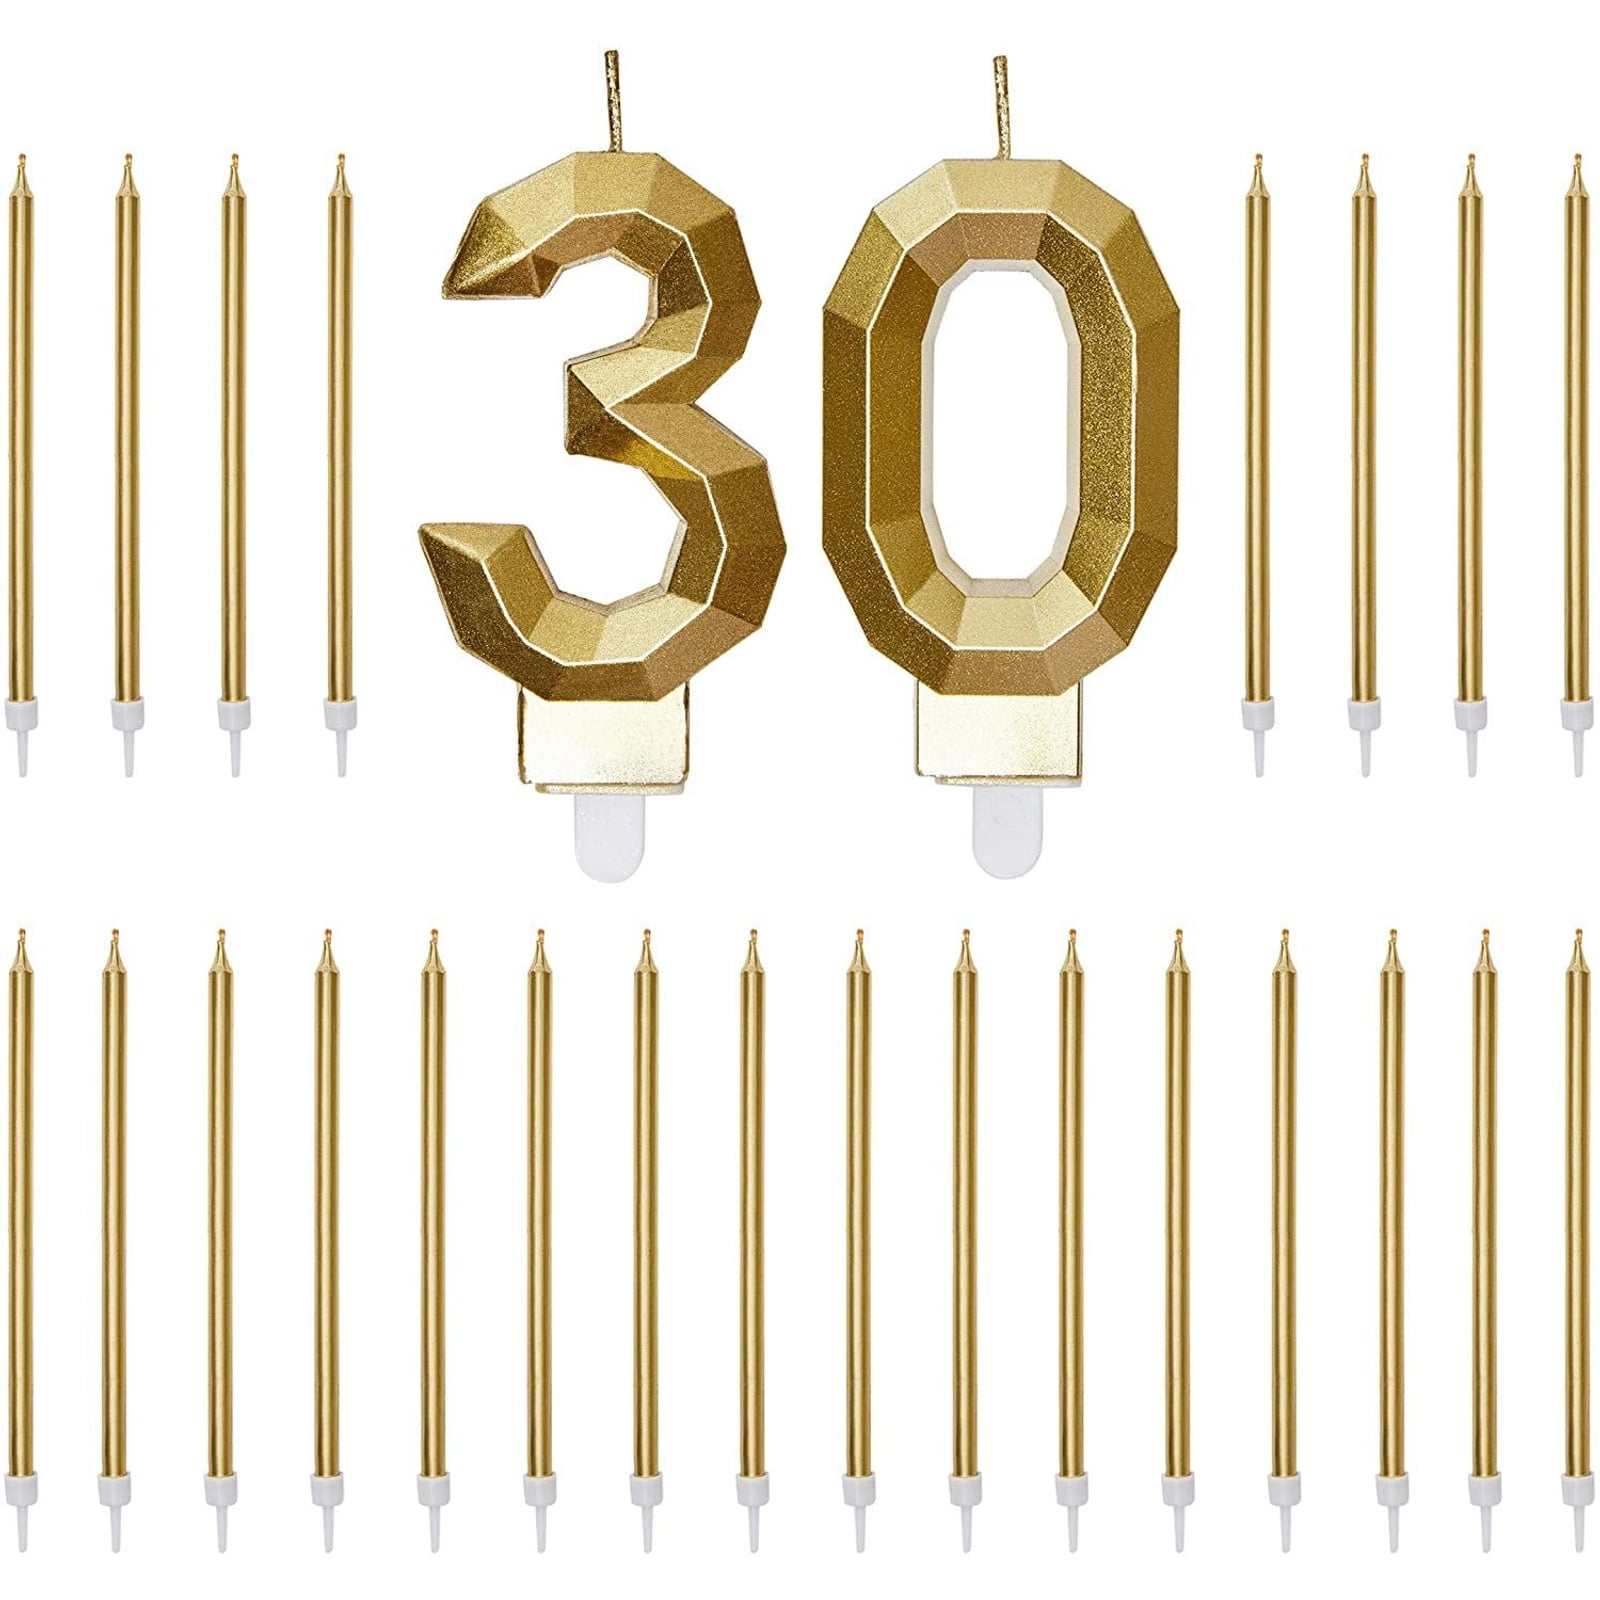 Make A Wish Birthday Cake Topper with Thin Candles in Holders Gold, 5 in, 24 Pack